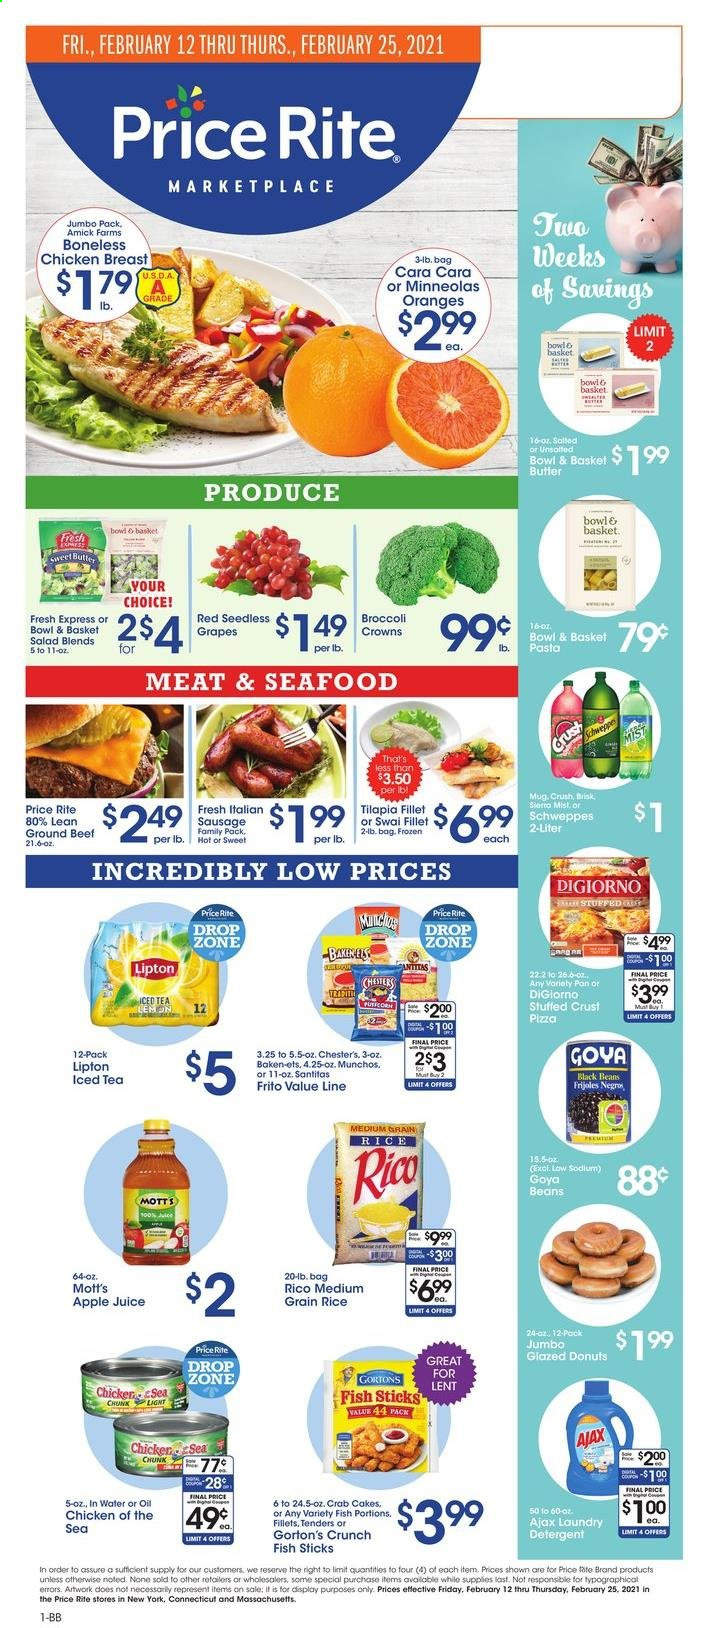 thumbnail - Price Rite Flyer - 02/12/2021 - 02/25/2021 - Sales products - donut, oranges, tilapia, seafood, fish, Gorton's, swai fillet, crab cake, salad, fish sticks, Bowl & Basket, sausage, butter, beans, Goya, black beans, rice, pasta, whole grain rice, oil, apple juice, Schweppes, juice, Lipton, Mott's, chicken breasts, beef meat, ground beef, detergent, Ajax, laundry detergent, bowl, grapes. Page 1.